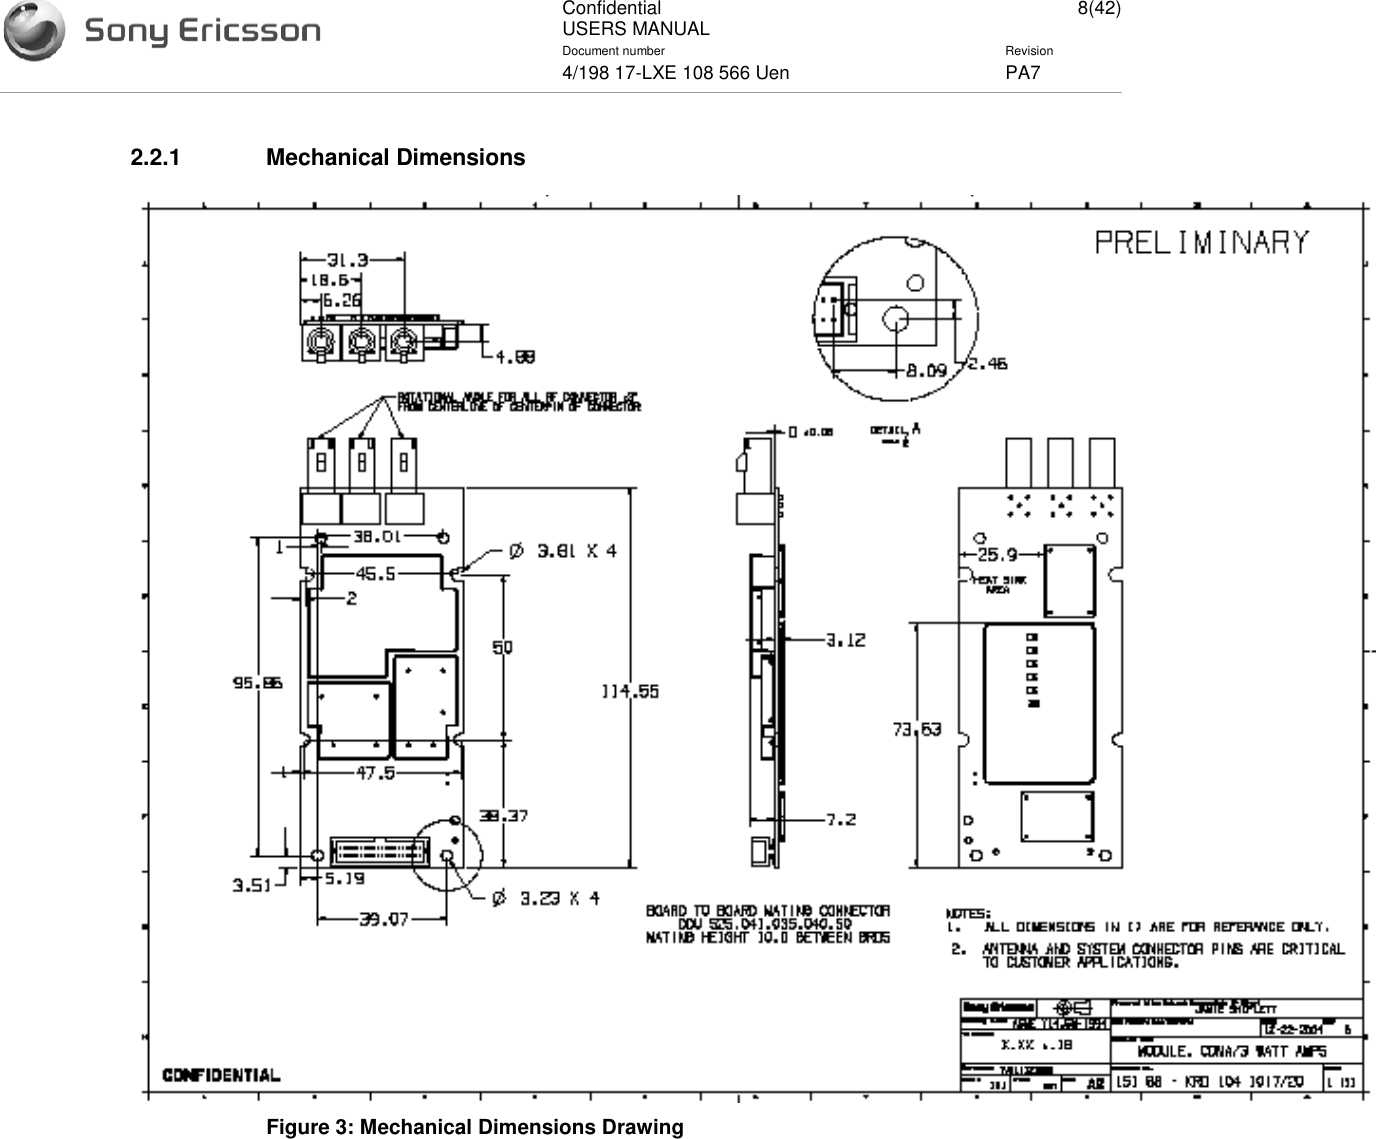 ConfidentialUSERS MANUAL 8(42)Document number Revision4/198 17-LXE 108 566 Uen PA72.2.1 Mechanical DimensionsFigure 3: Mechanical Dimensions Drawing